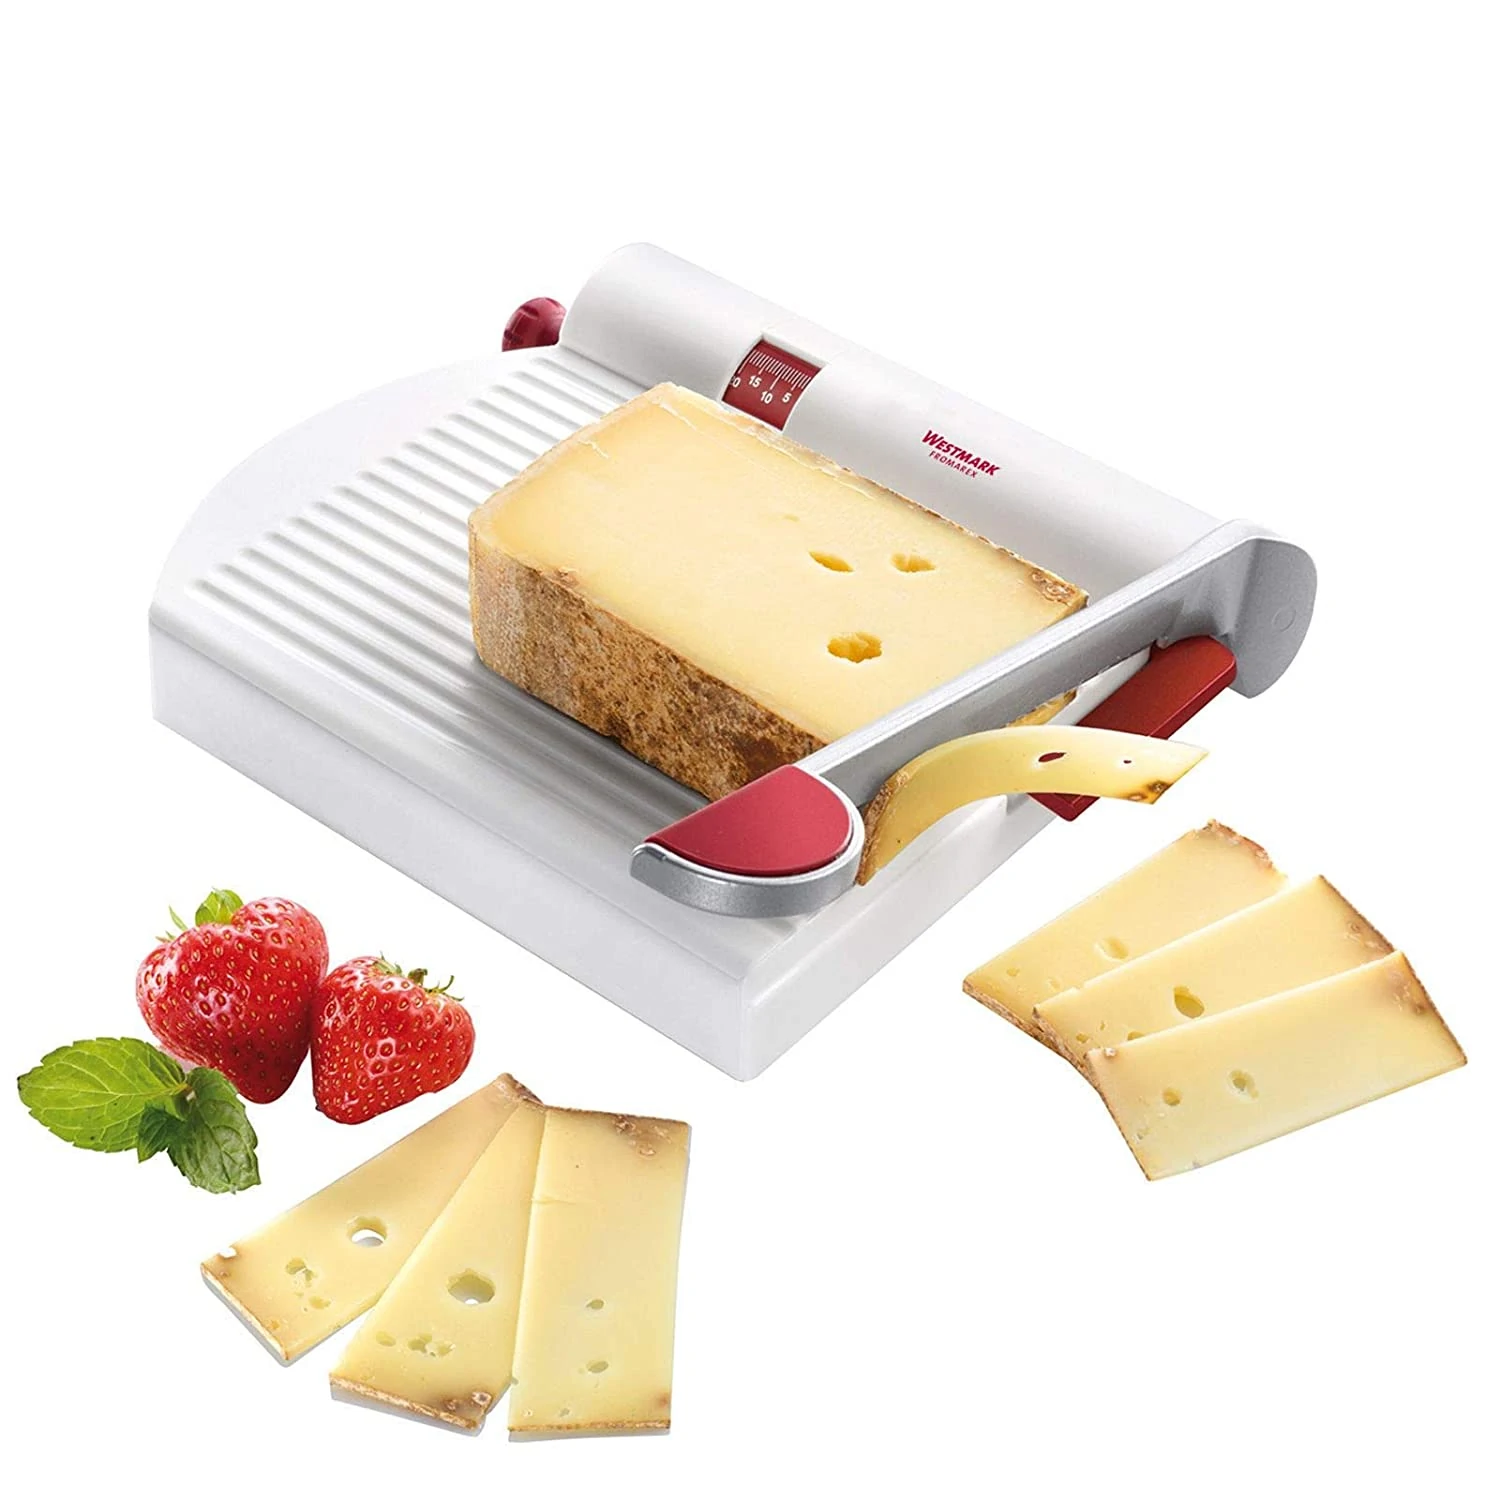 The Best Tools For Cutting Hard Cheese! 2